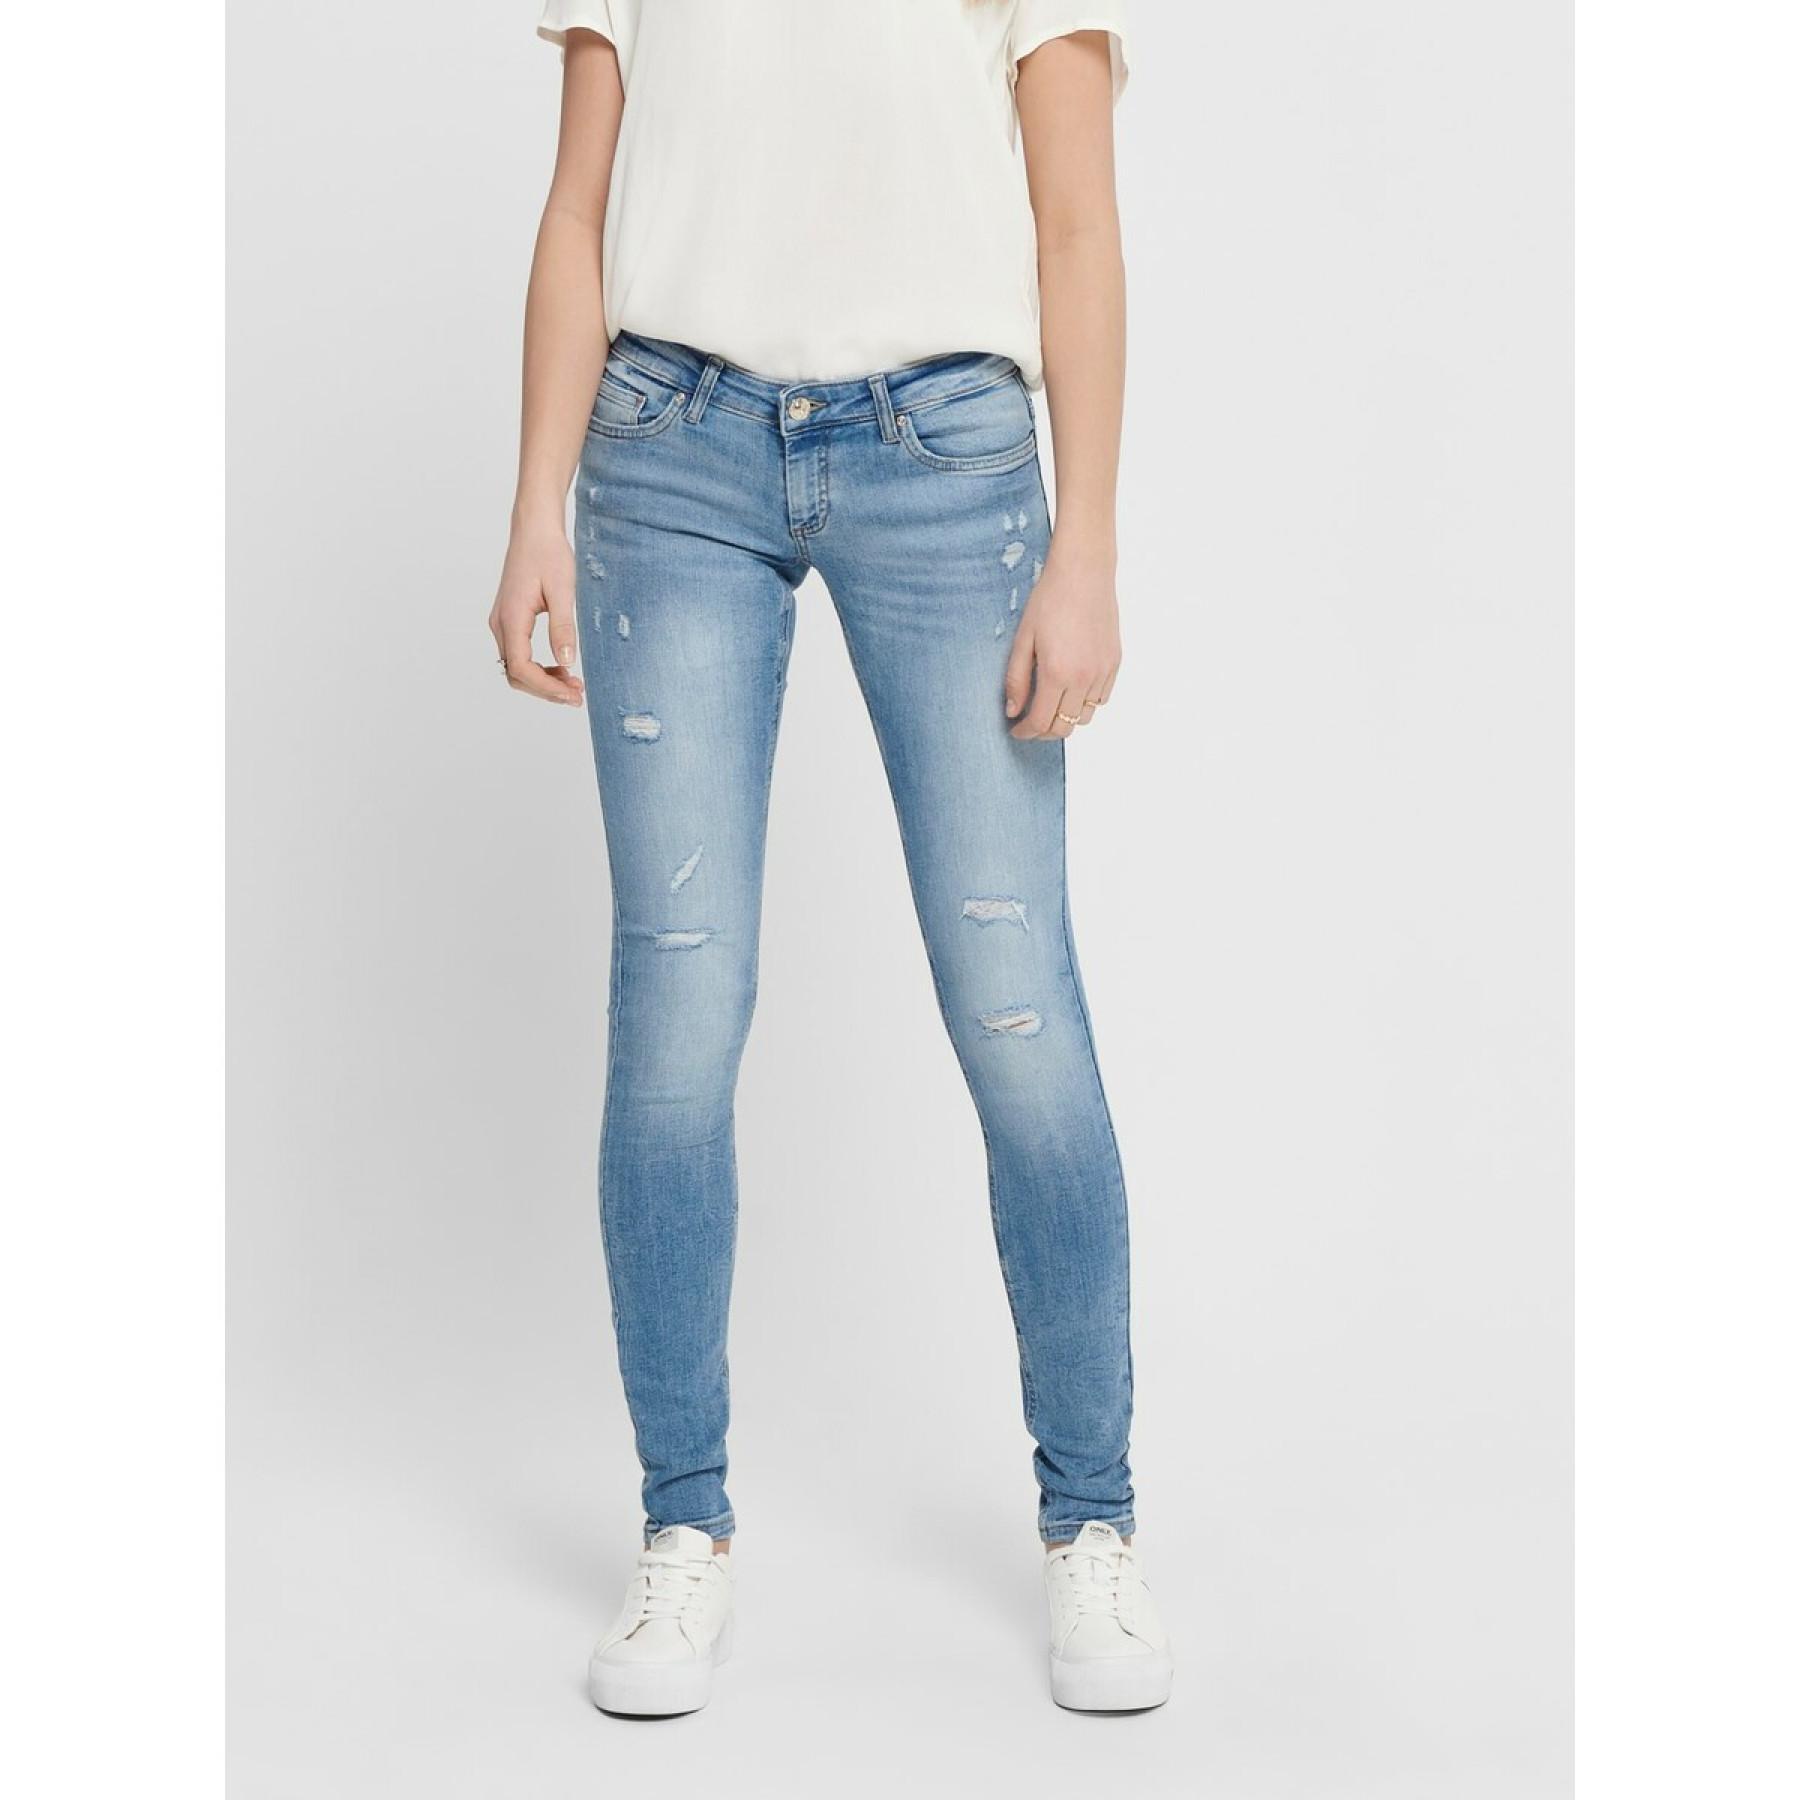 Women's jeans Only Coral life